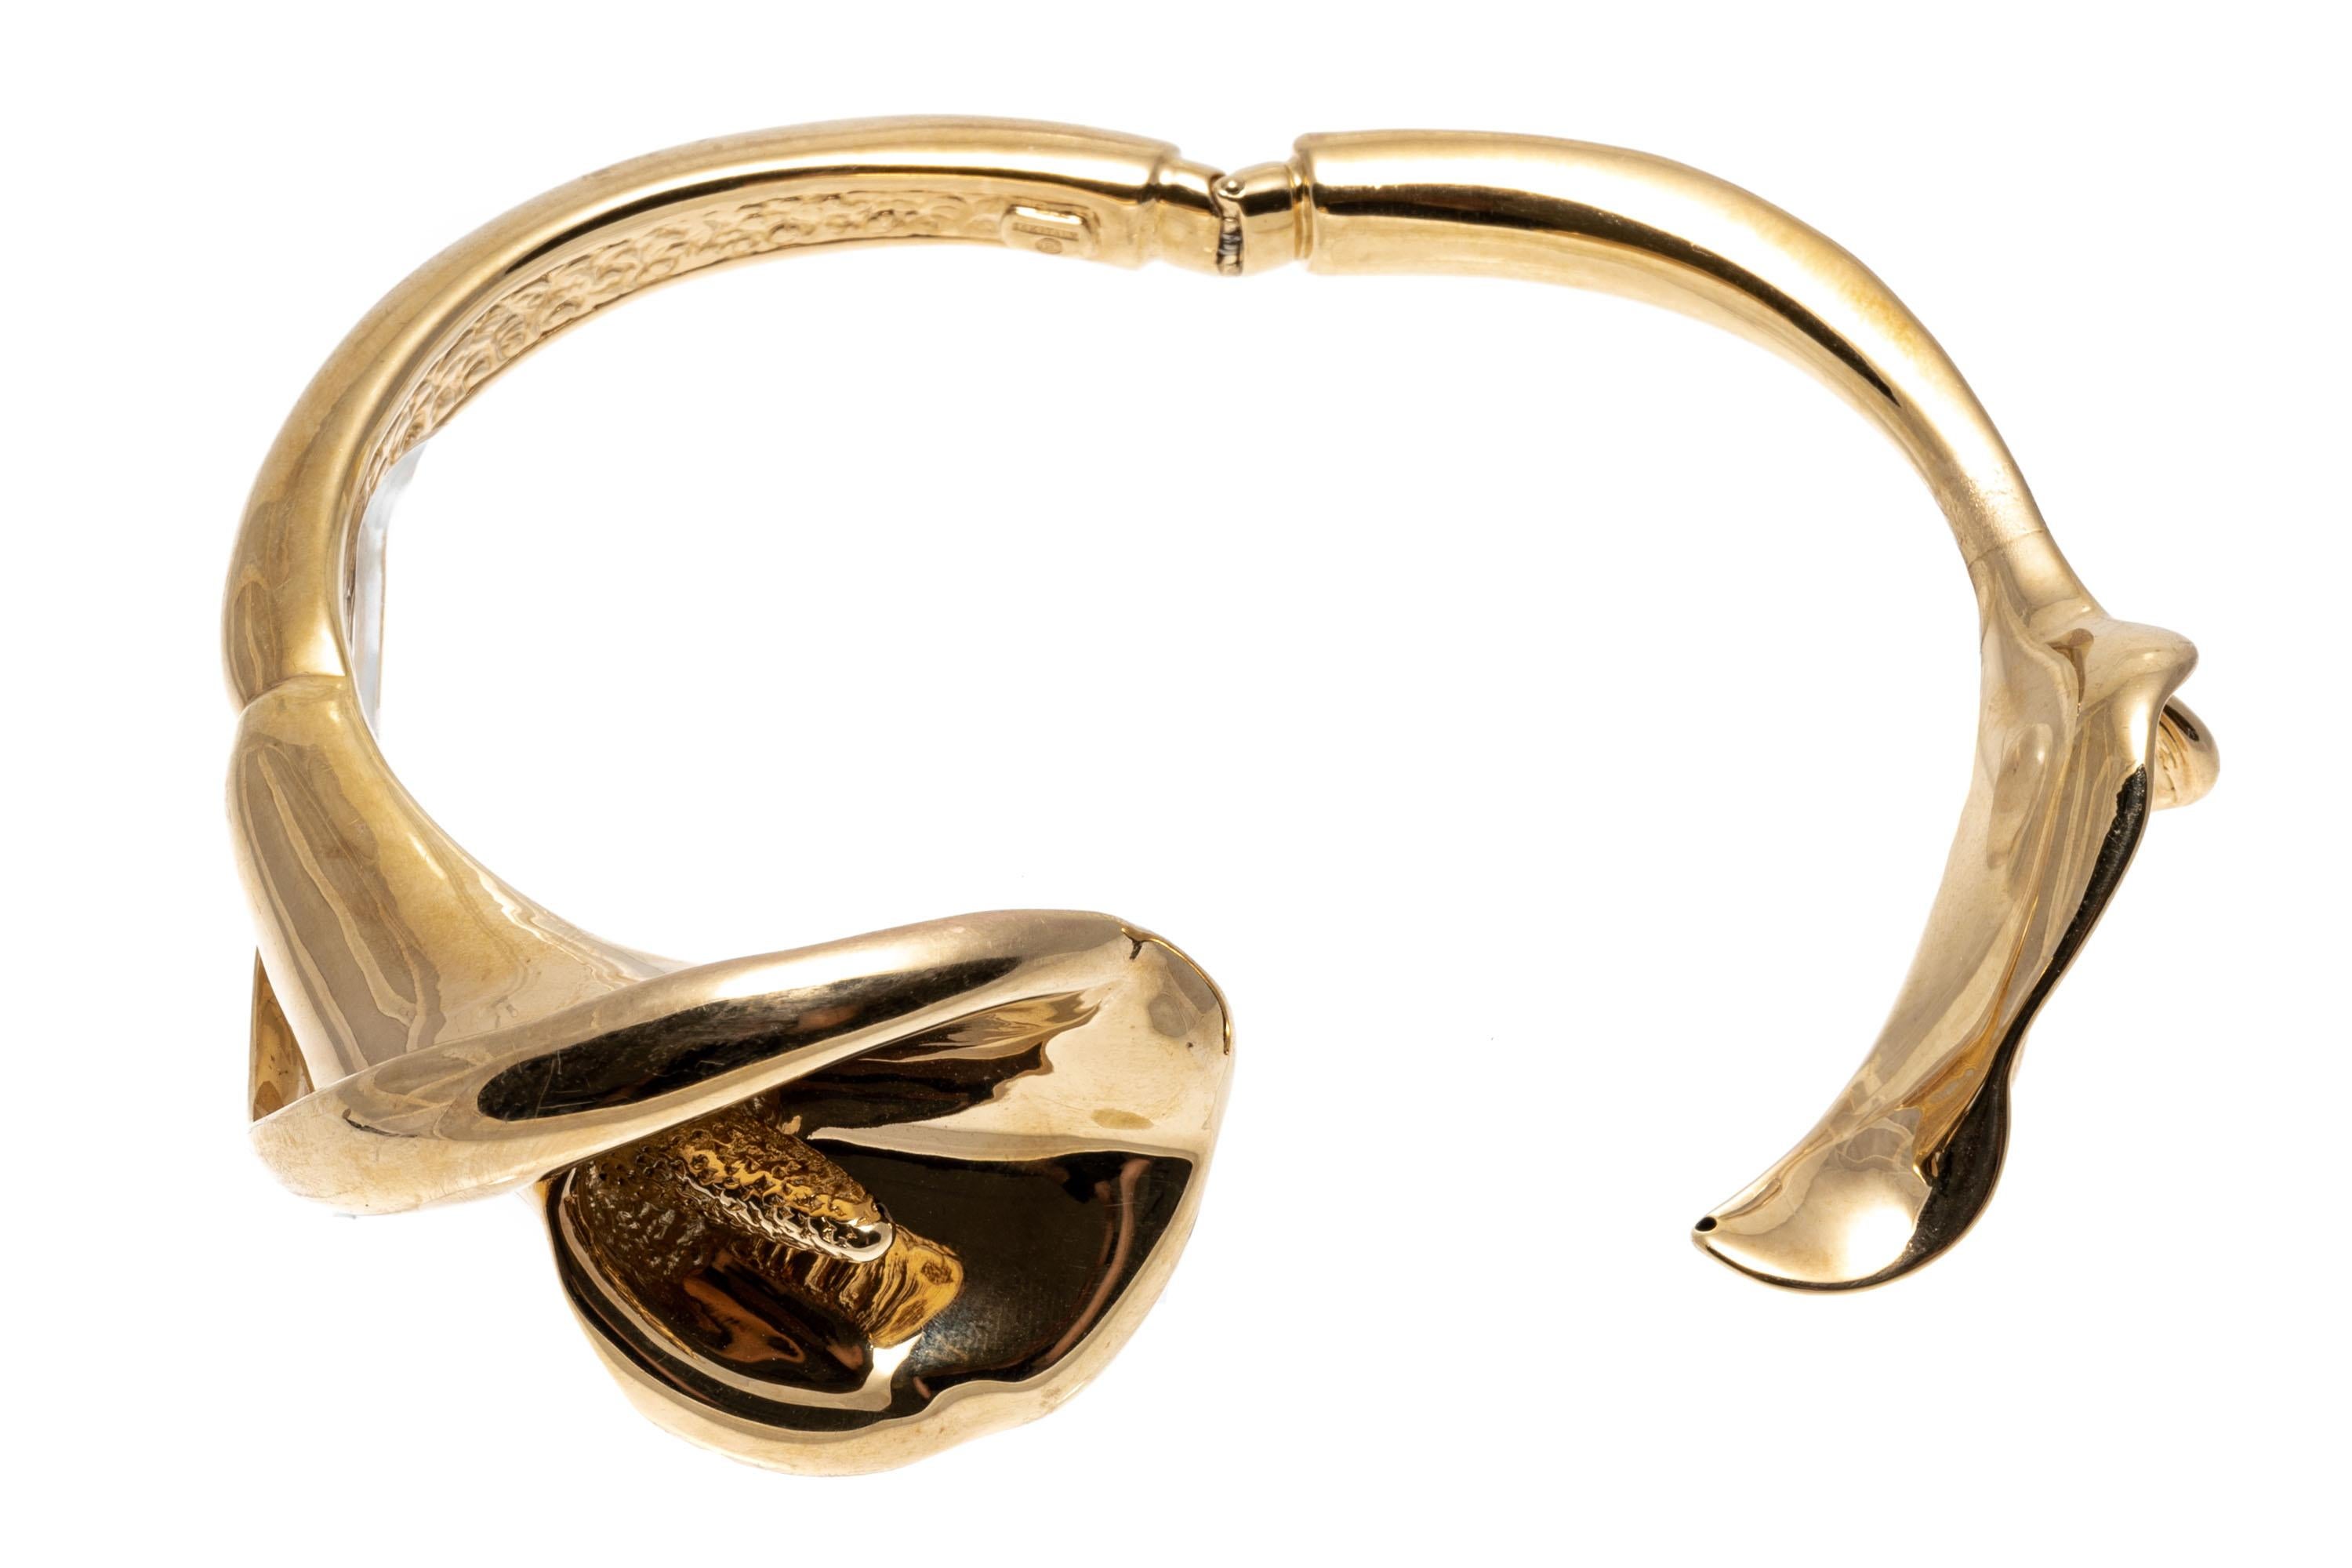 This stunning 14K yellow gold hinged cuff bracelet features a beautiful figural, electro-formed calla lily flower and leaf.
Marks: 14k
Dimensions: 2 1/4